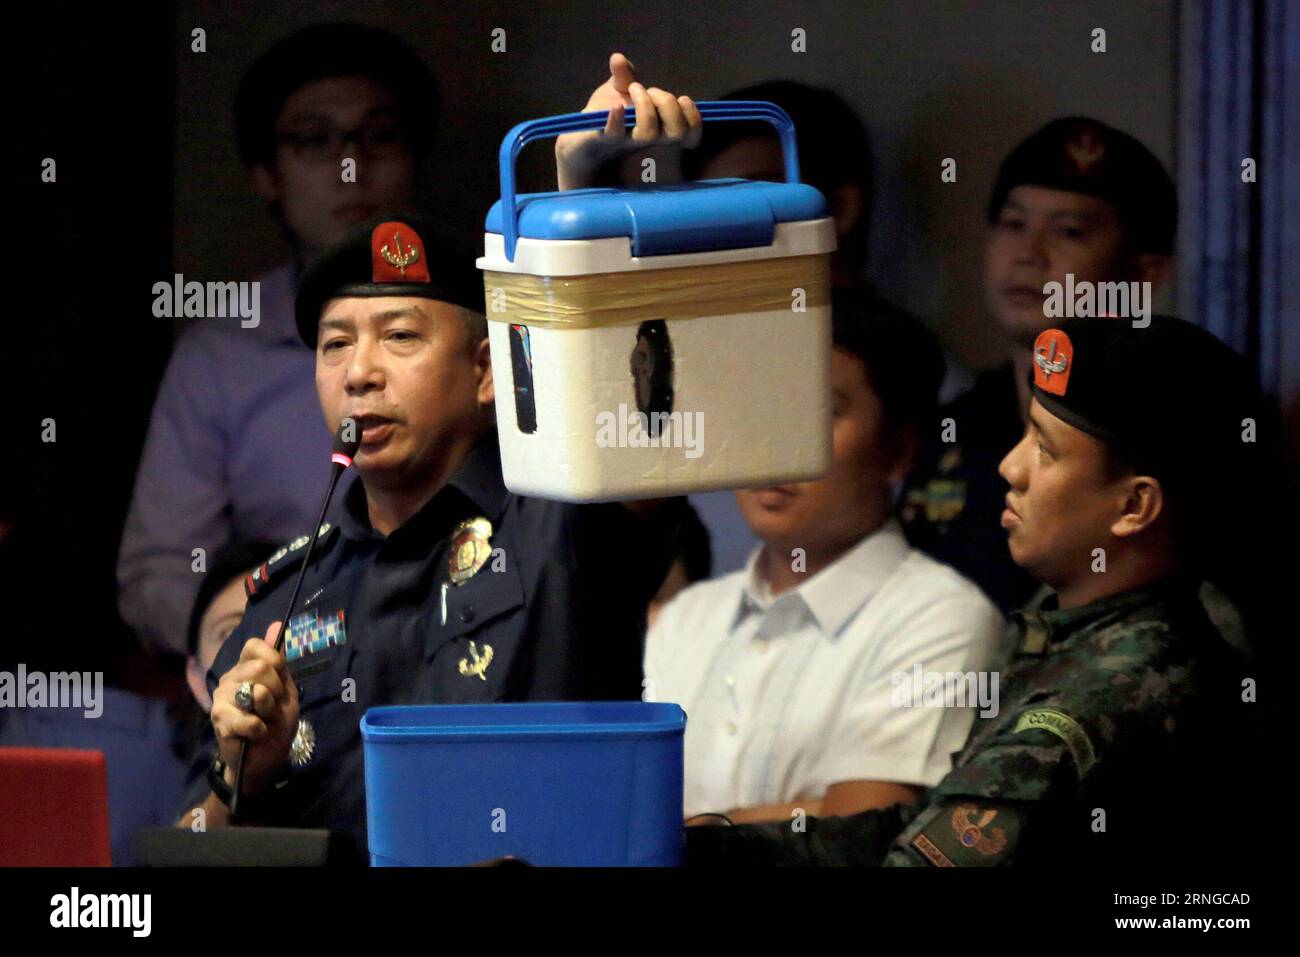 (160920) -- QUEZON CITY, Sept. 20, 2016 -- An official from the Philippine National Police Special Action Force (PNP-SAF) presents a mobile phone encased in a cooler to show how illegal contrabands are smuggled into the New Bilibid Prison (NBP) during a hearing on the illegal drug trade at the Philippine House of Representatives in Quezon City, the Philippines, Sept. 20, 2016. )(hy) PHILIPPINES-QUEZON CITY-ILLEGAL DRUG-HEARING RouellexUmali PUBLICATIONxNOTxINxCHN   Quezon City Sept 20 2016 to Official from The Philippine National Police Special Action Force PNP SAF Presents a Mobile Phone enca Stock Photo